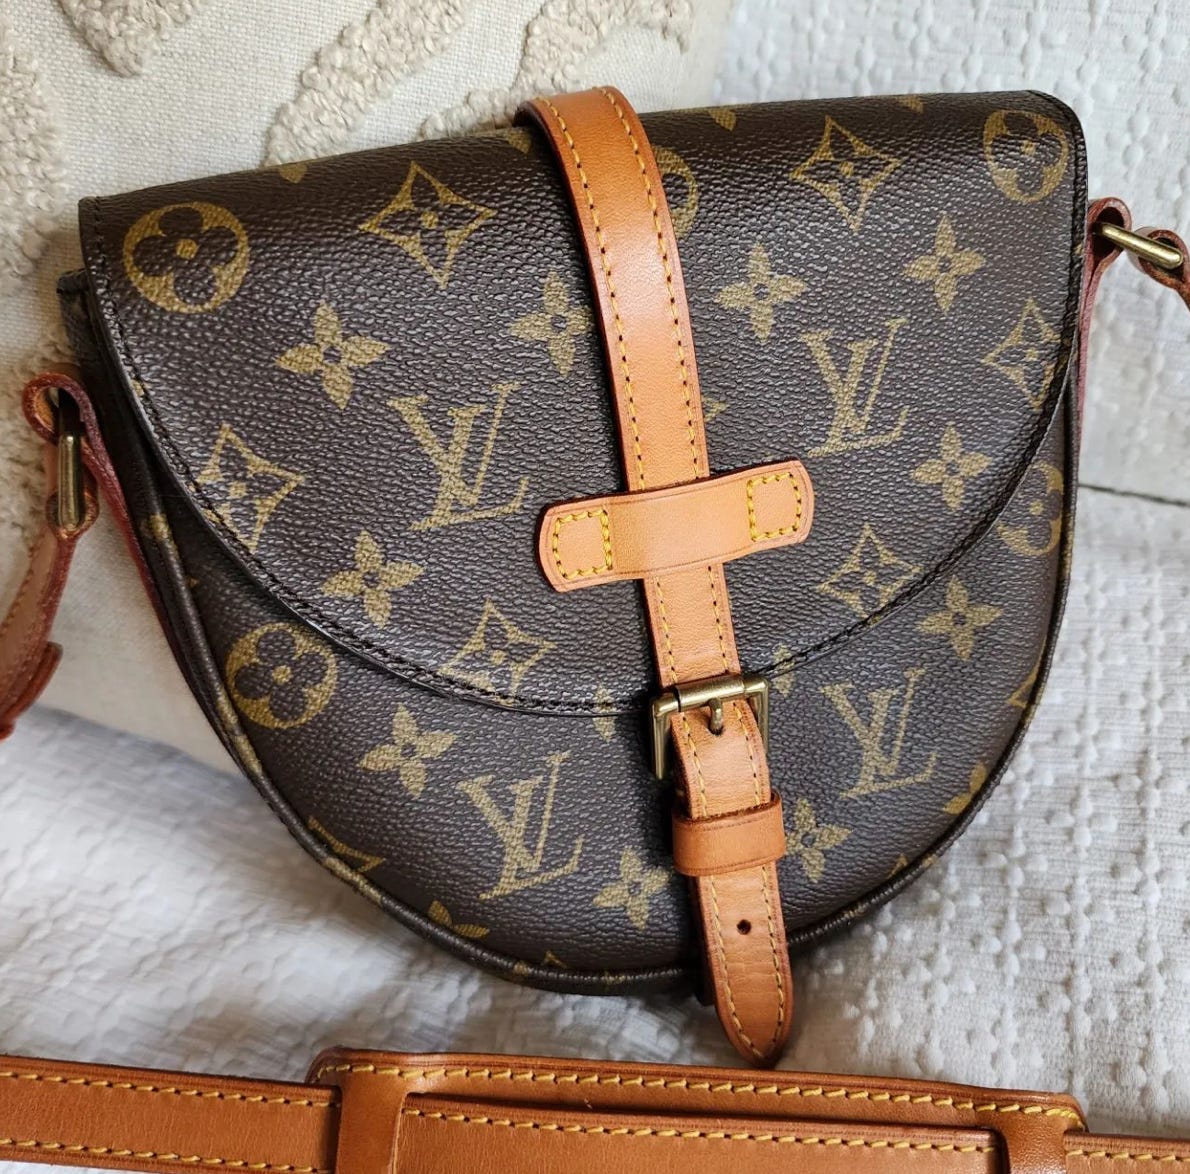 What Should Your First Louis Vuitton Bag Be?  Louis vuitton handbags  crossbody, Louis vuitton crossbody bag, Louis vuitton bag